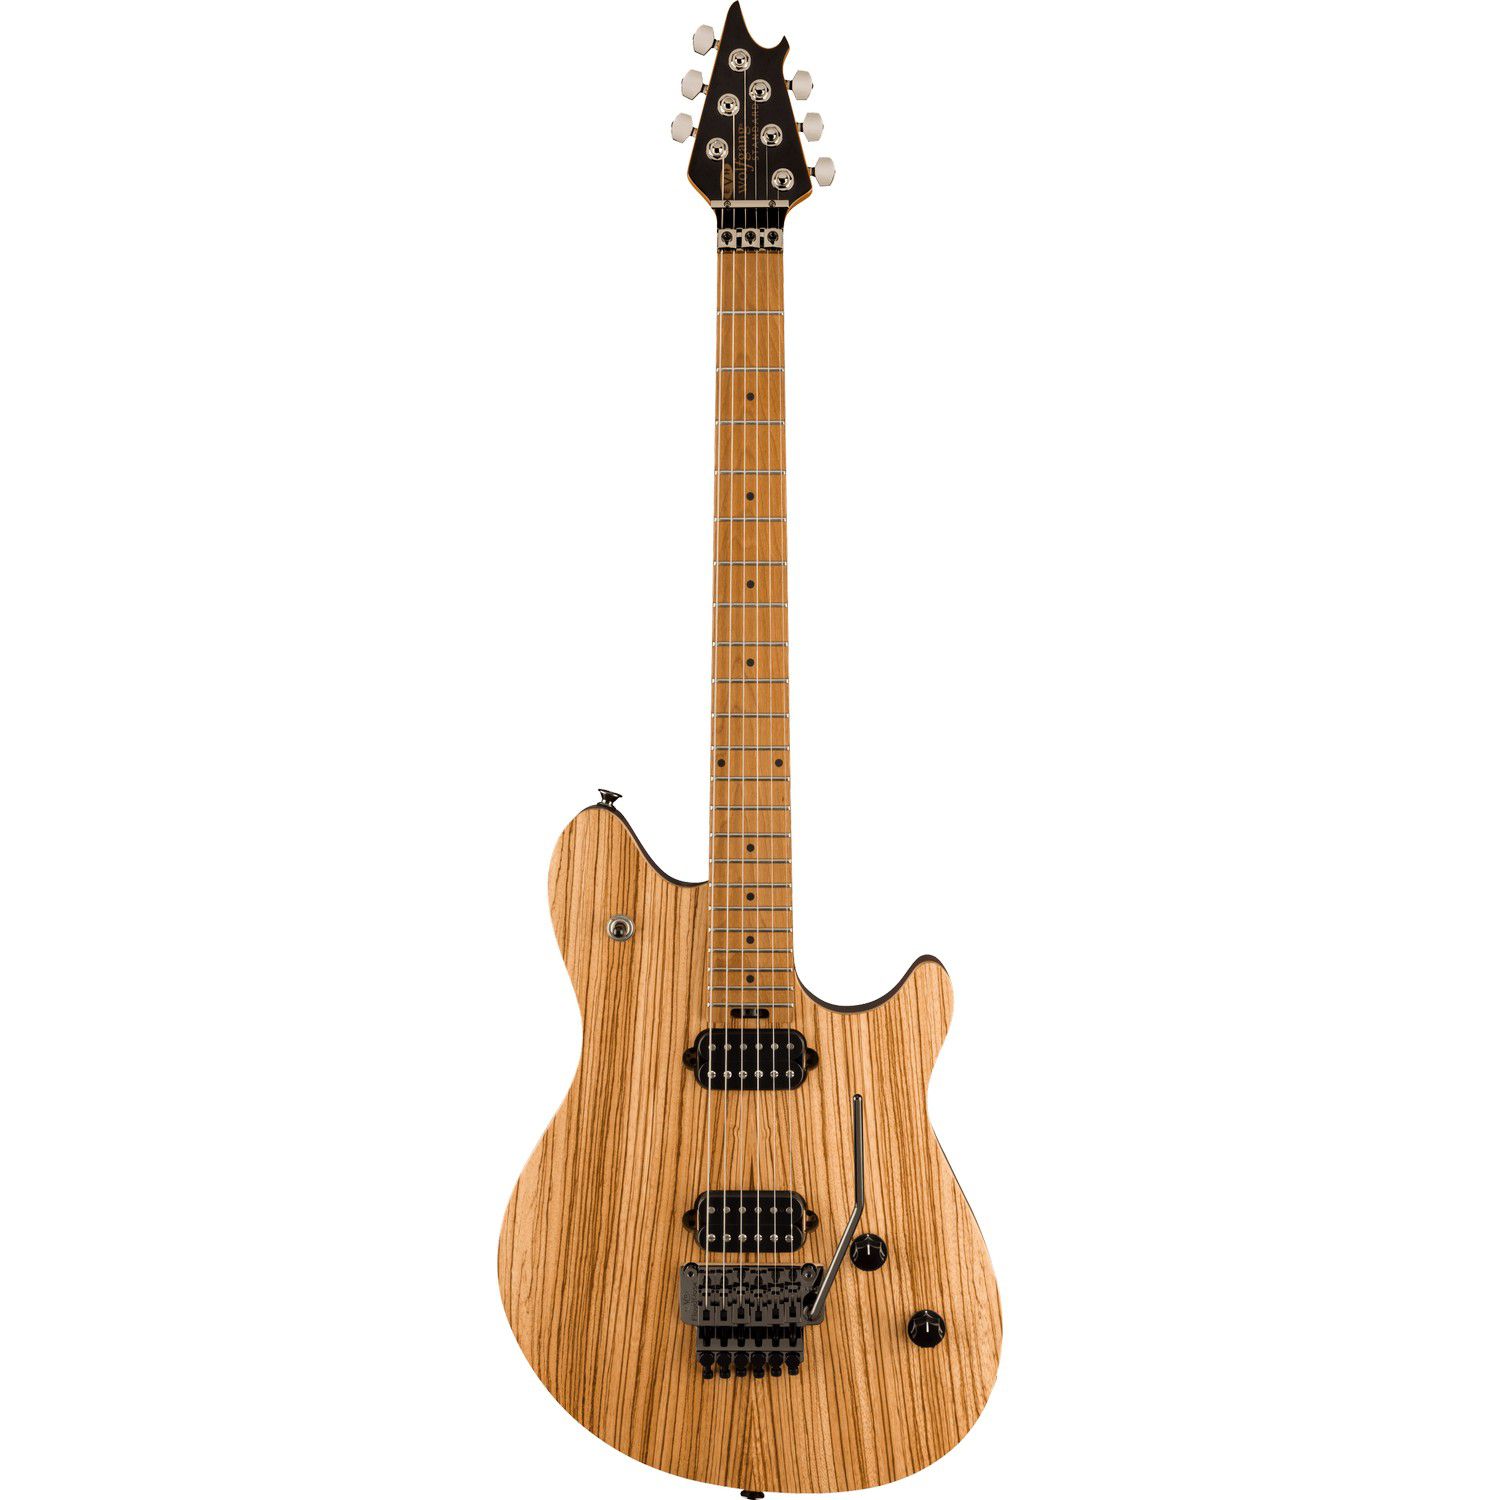 An image of Evh Wolfgang Standard Exotic Baked Maple Fb Zebrawood Electric Guitar